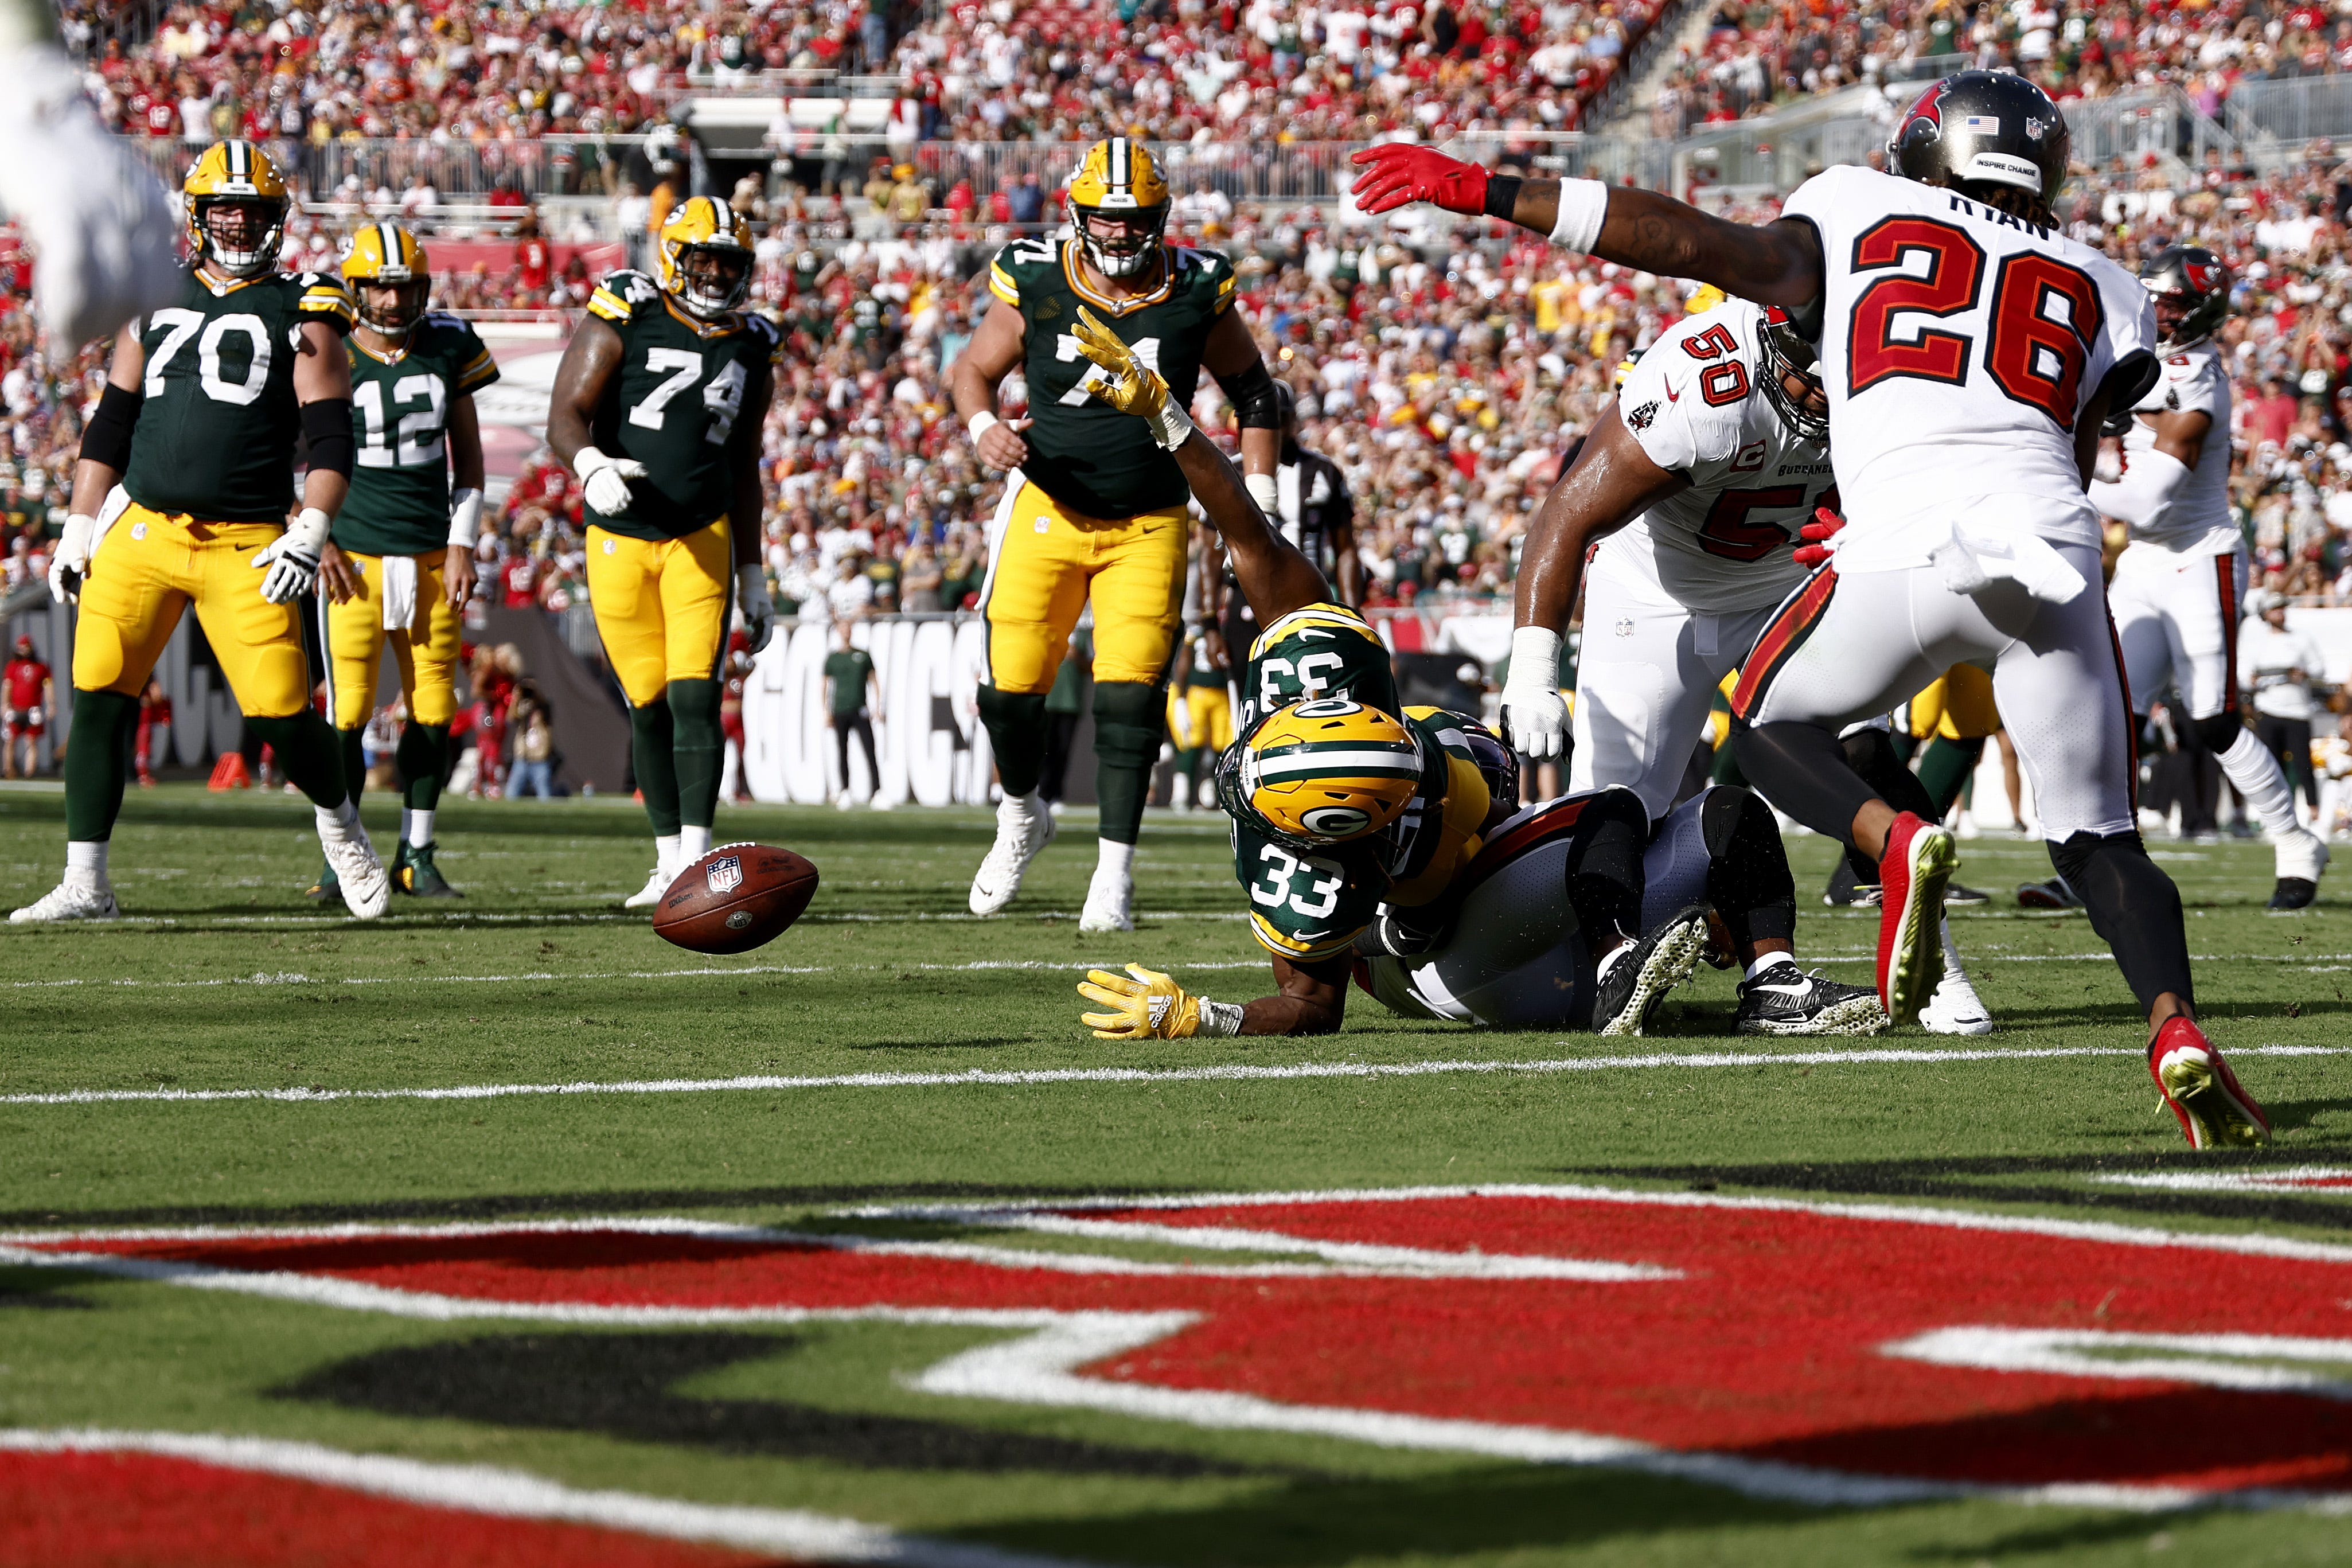 Packers running back Aaron Jones fumbles the ball on the goal line during the second quarter against the Buccaneers on Sept. 25, 2022, at Raymond James Stadium in Tampa, Florida.